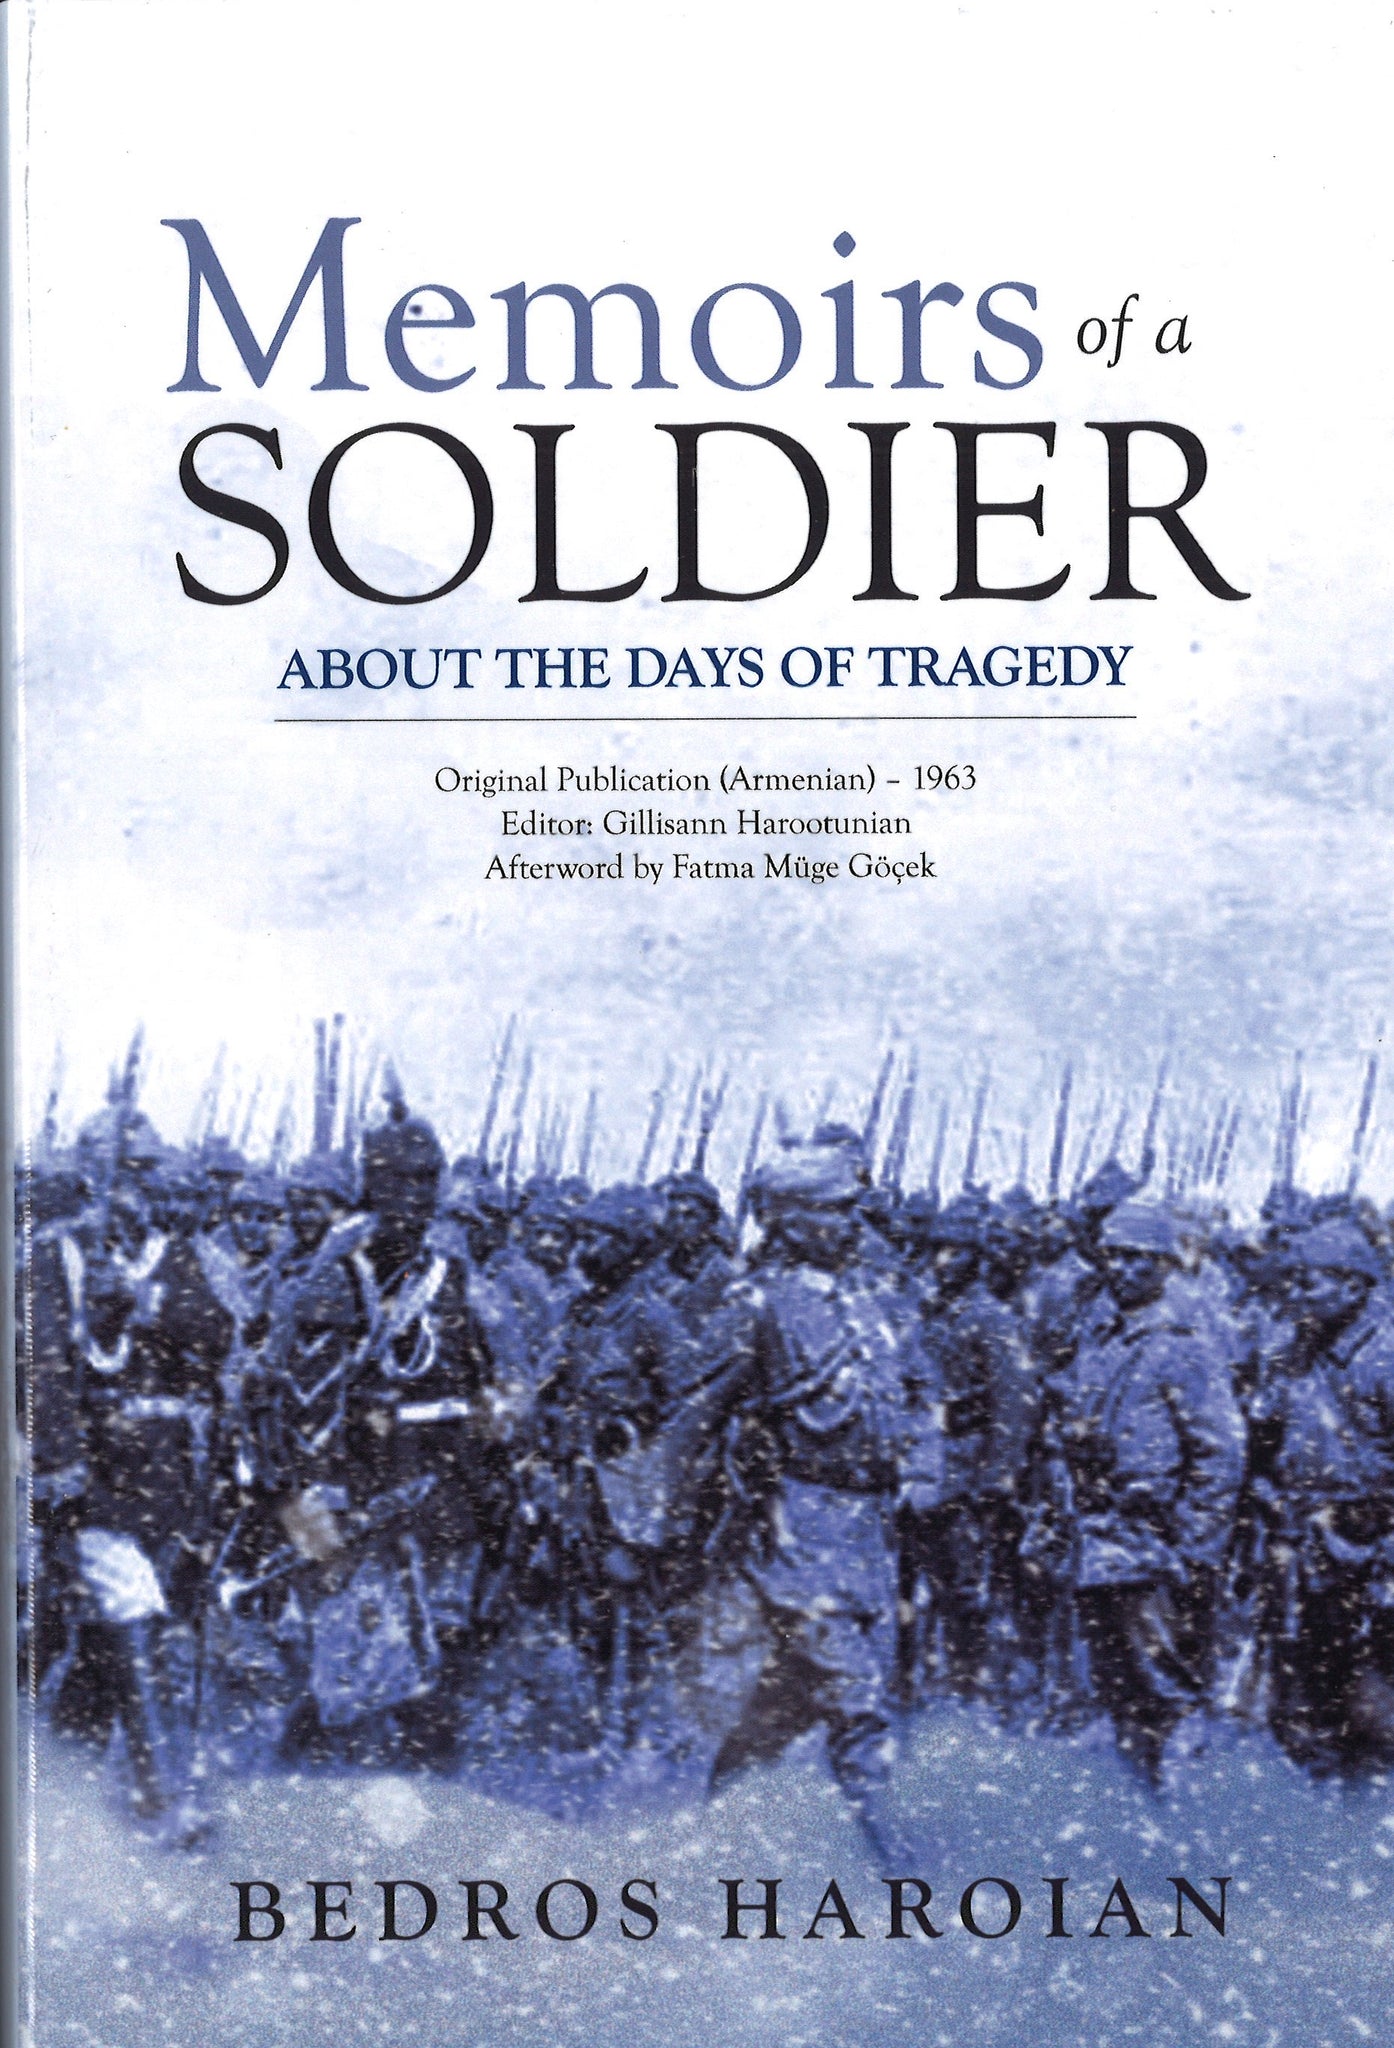 Memoirs of a Soldier About the Days of Tragedy